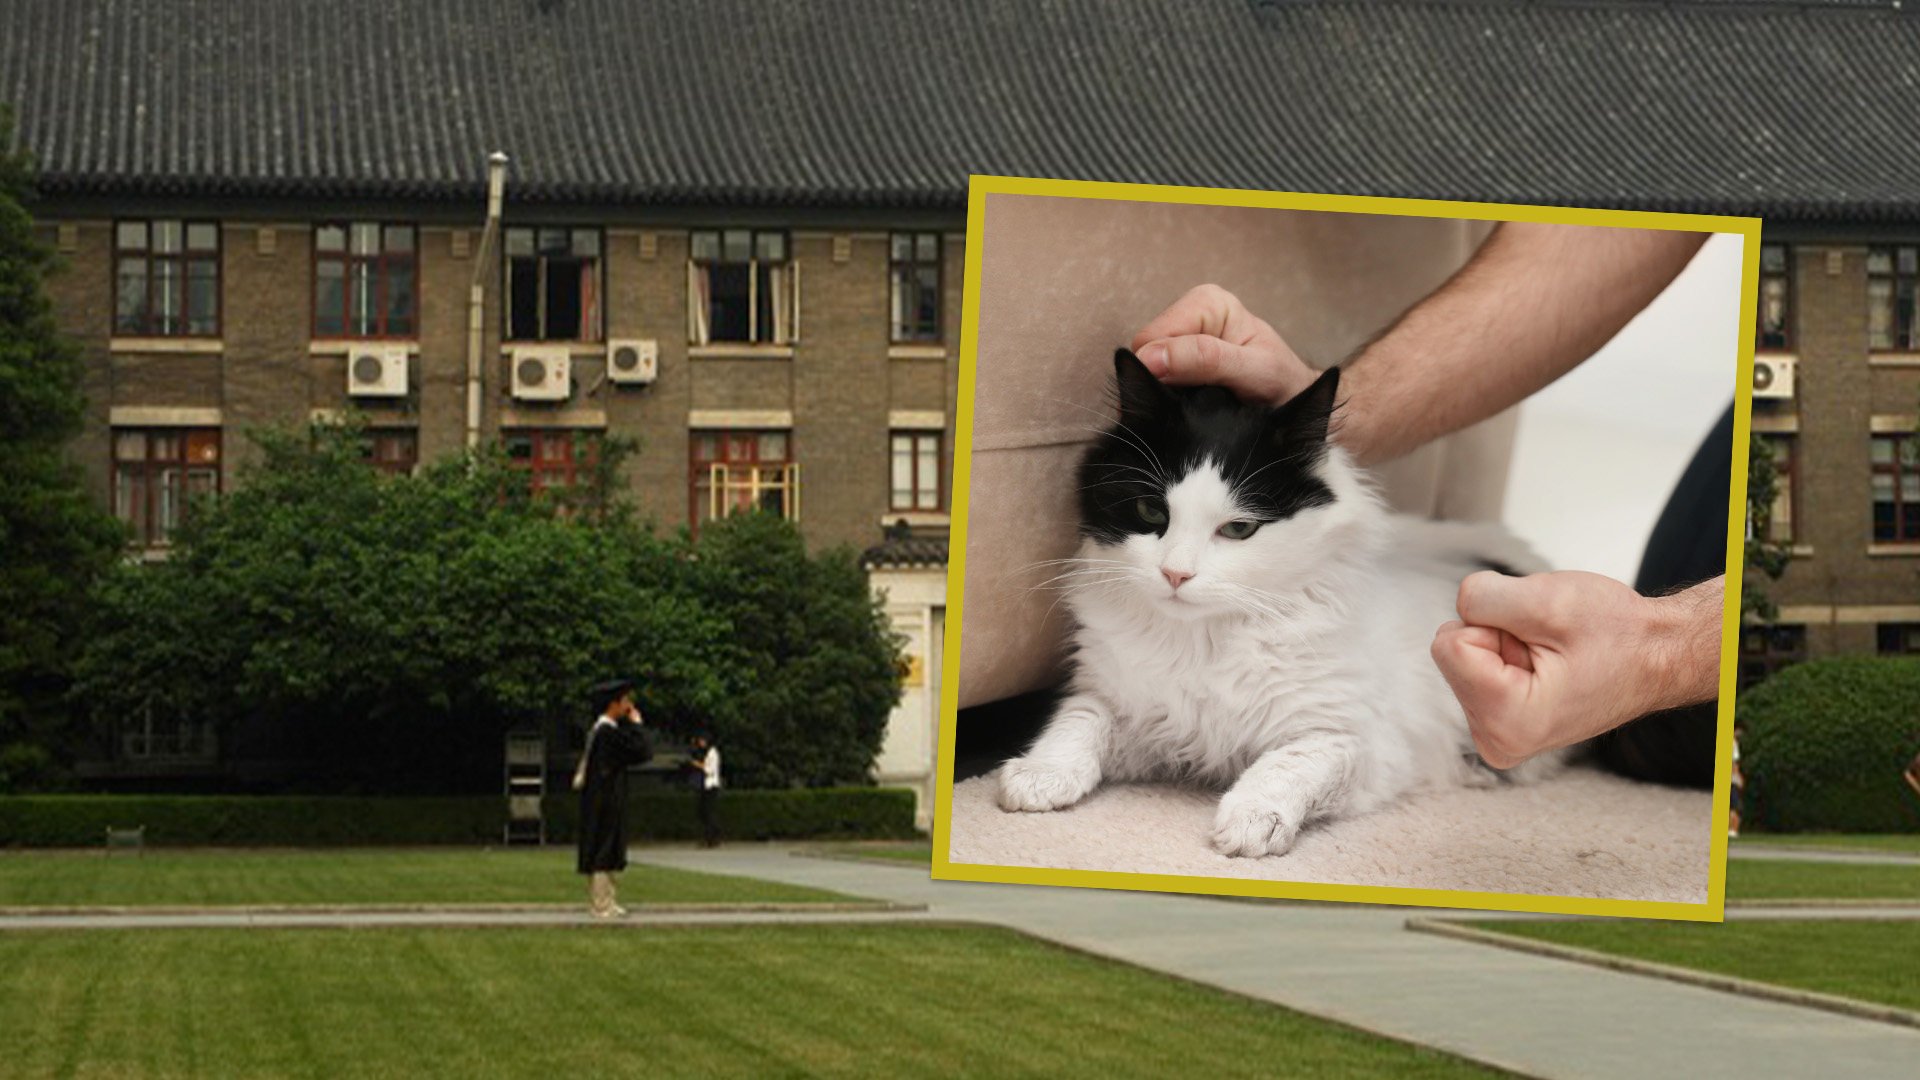 An academically gifted man has been rejected for admission to a top university in China because of his history of abusing cats. Photo: SCMP composite/Shutterstock/Wikipedia